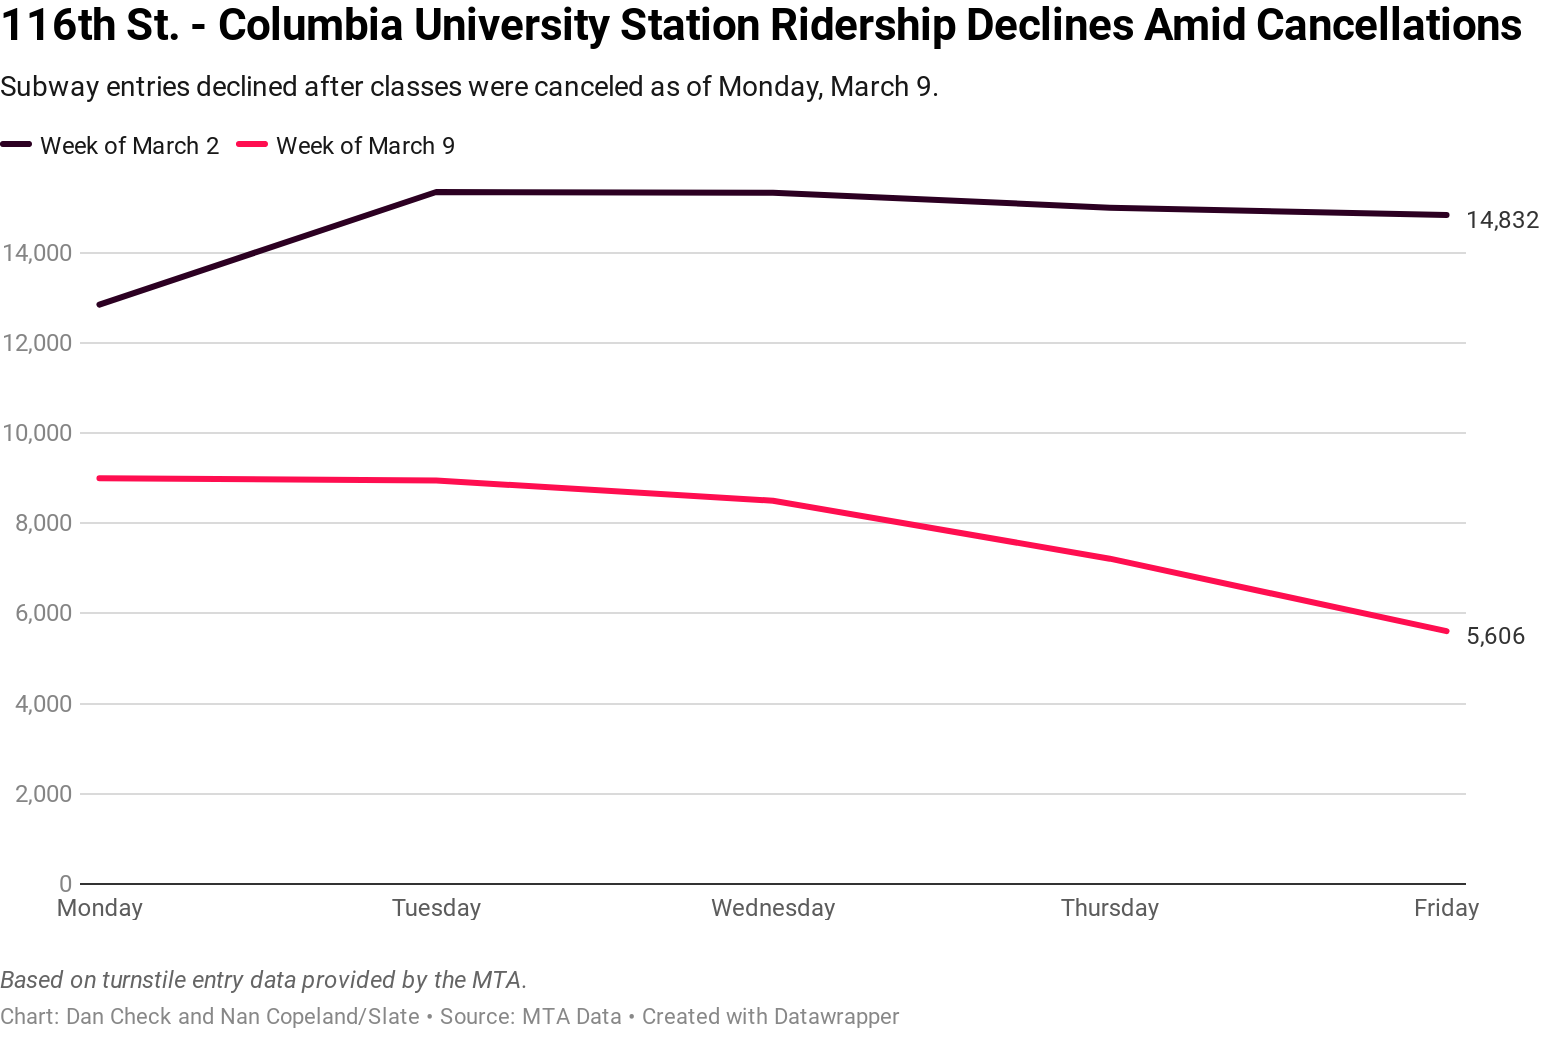 116 St - Columbia University showed the sharpest decline in the NYC subway system.